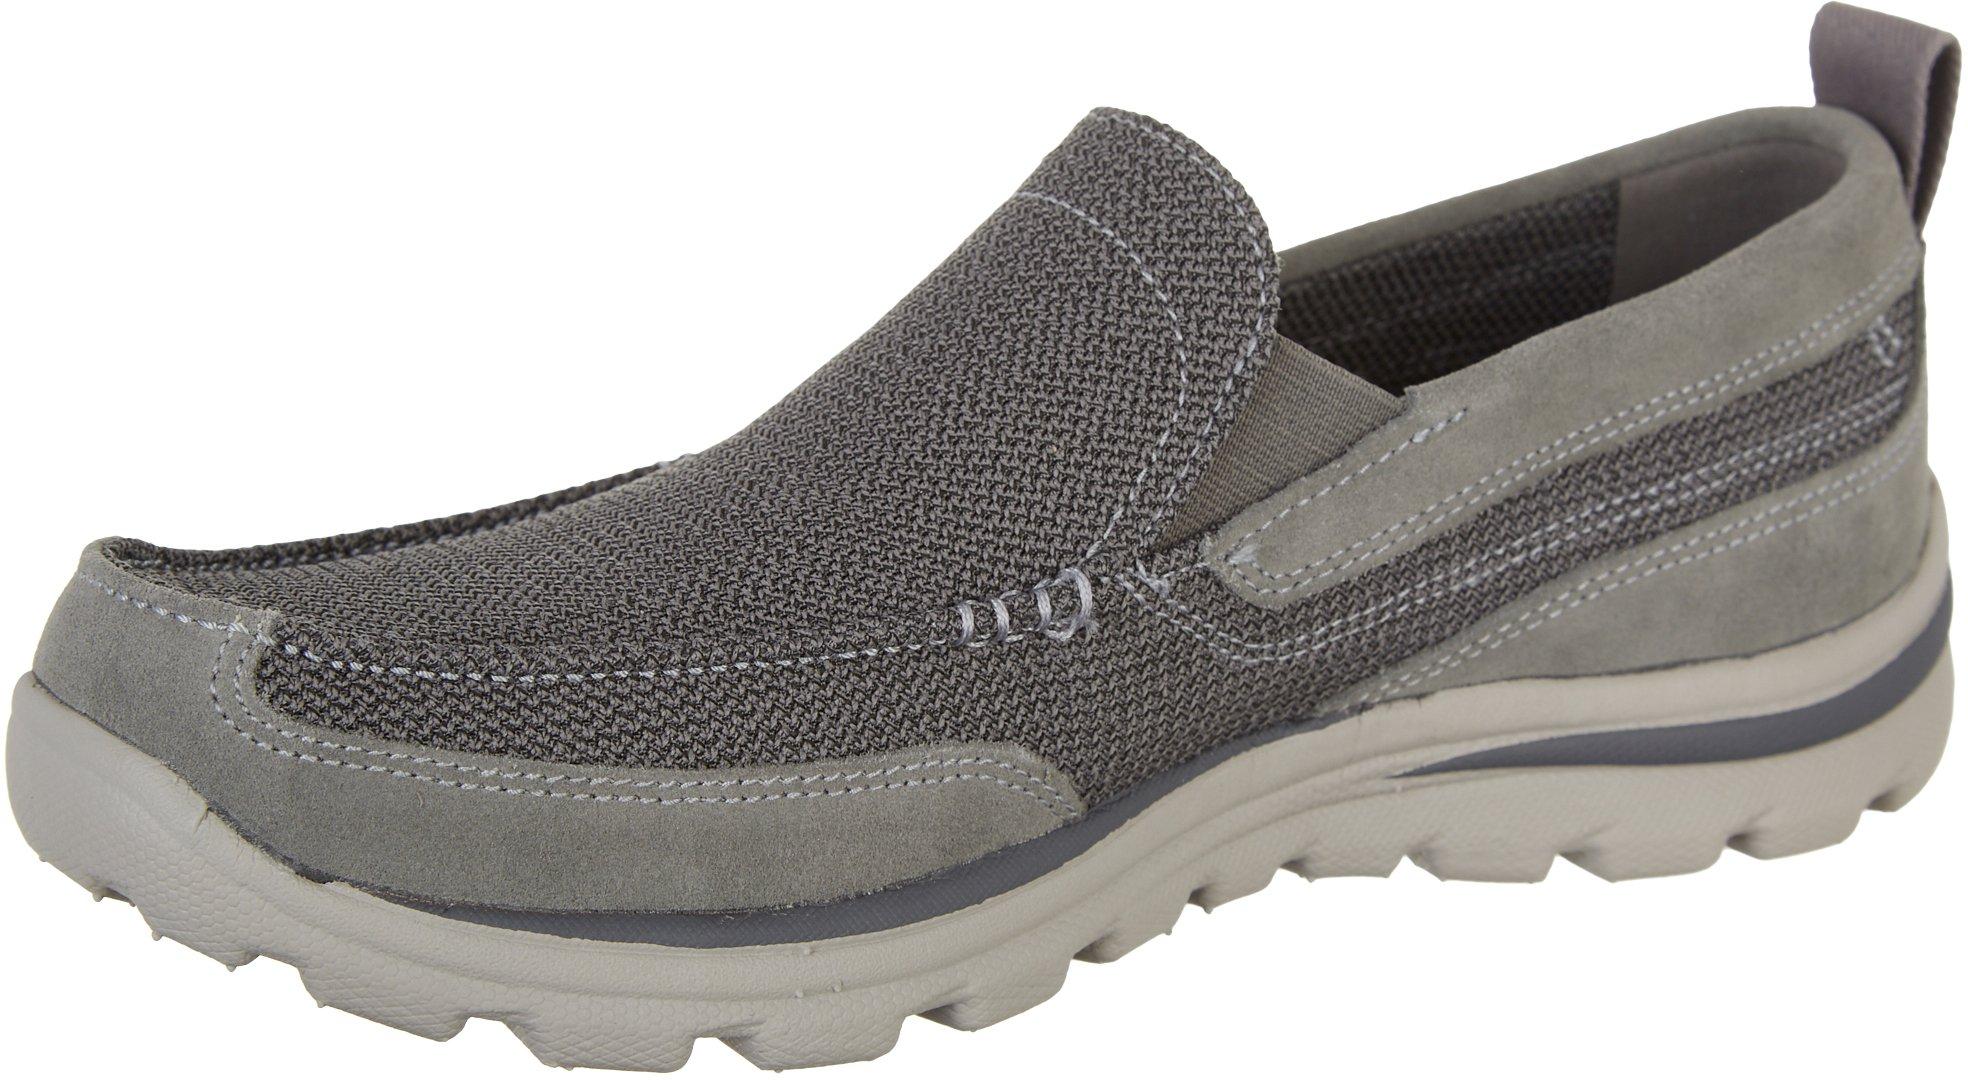 Skechers Mens Relaxed Fit Milford Slip On Shoes 11 Charcoal/grey | eBay